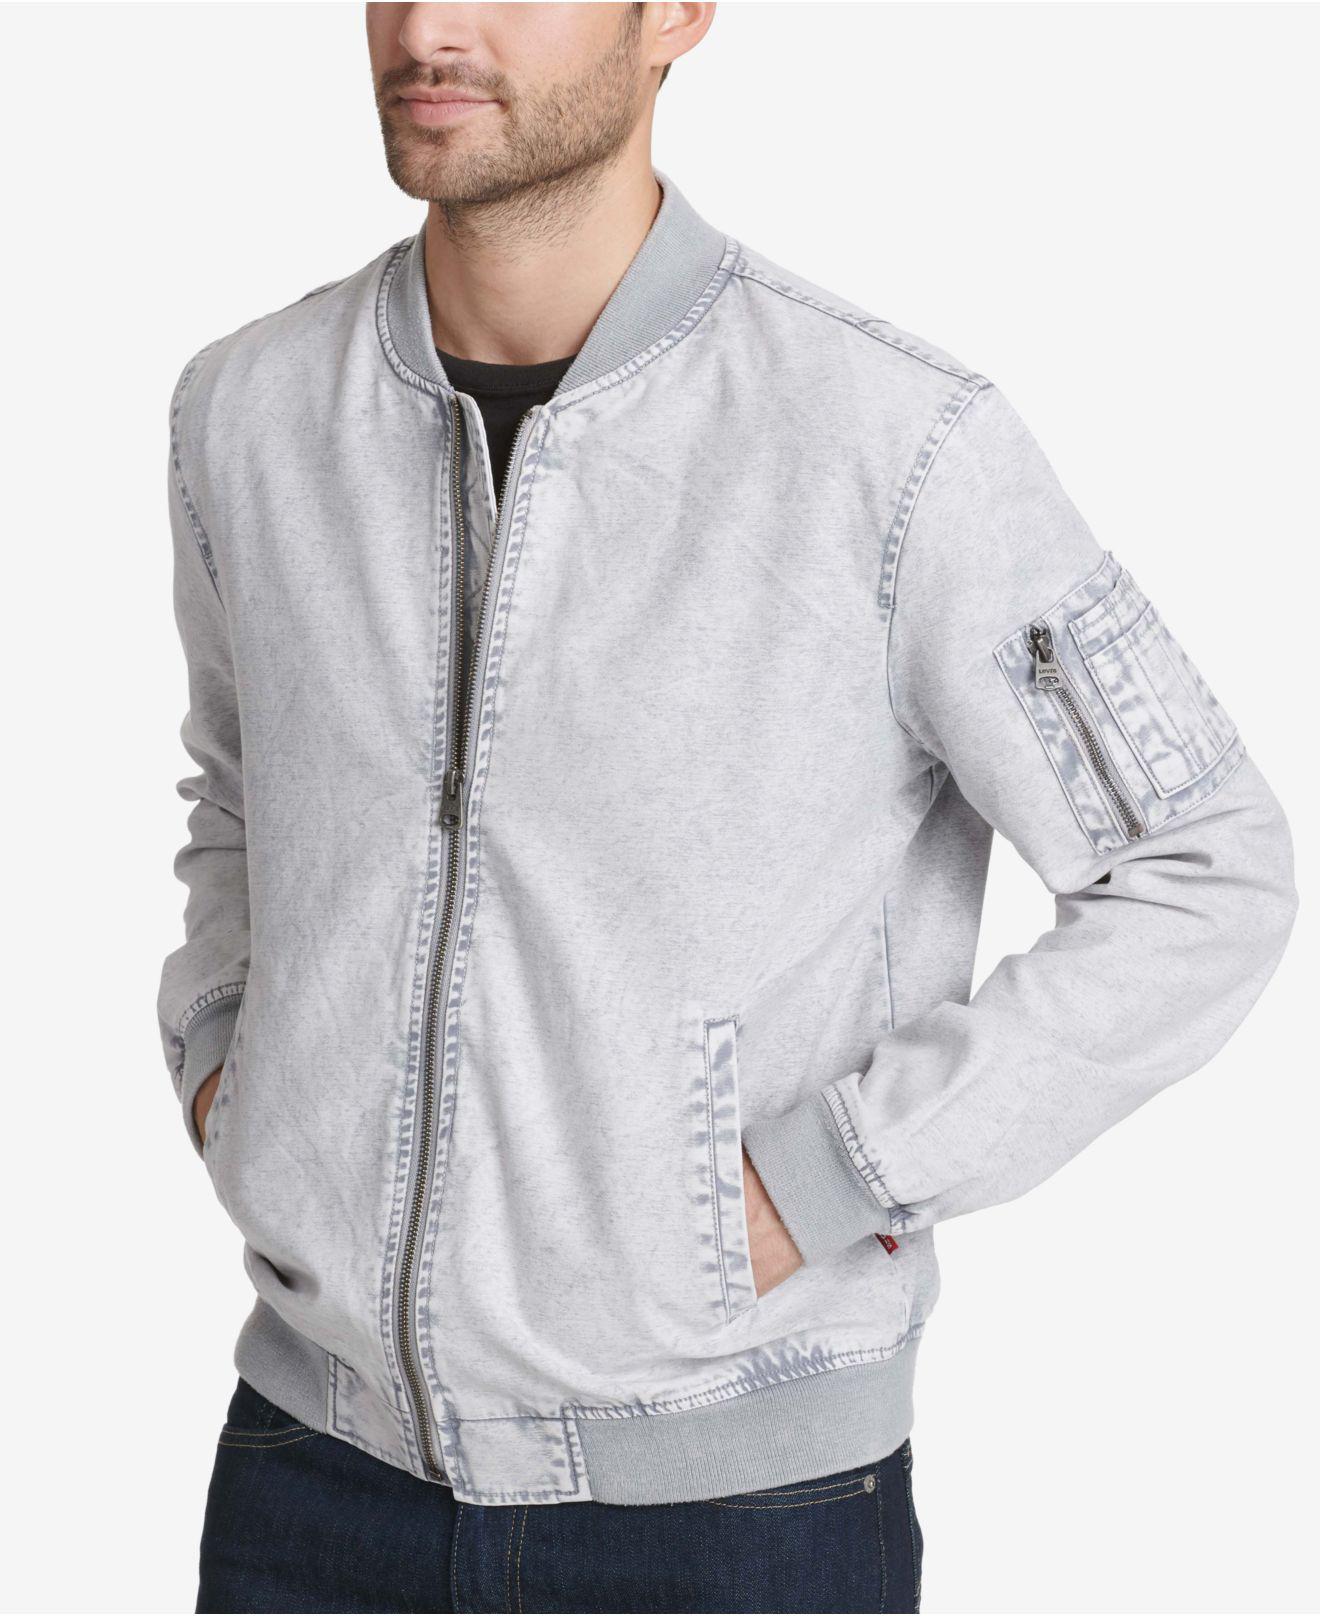 Levi's Synthetic Acid Wash Bomber Jacket in White for Men - Lyst